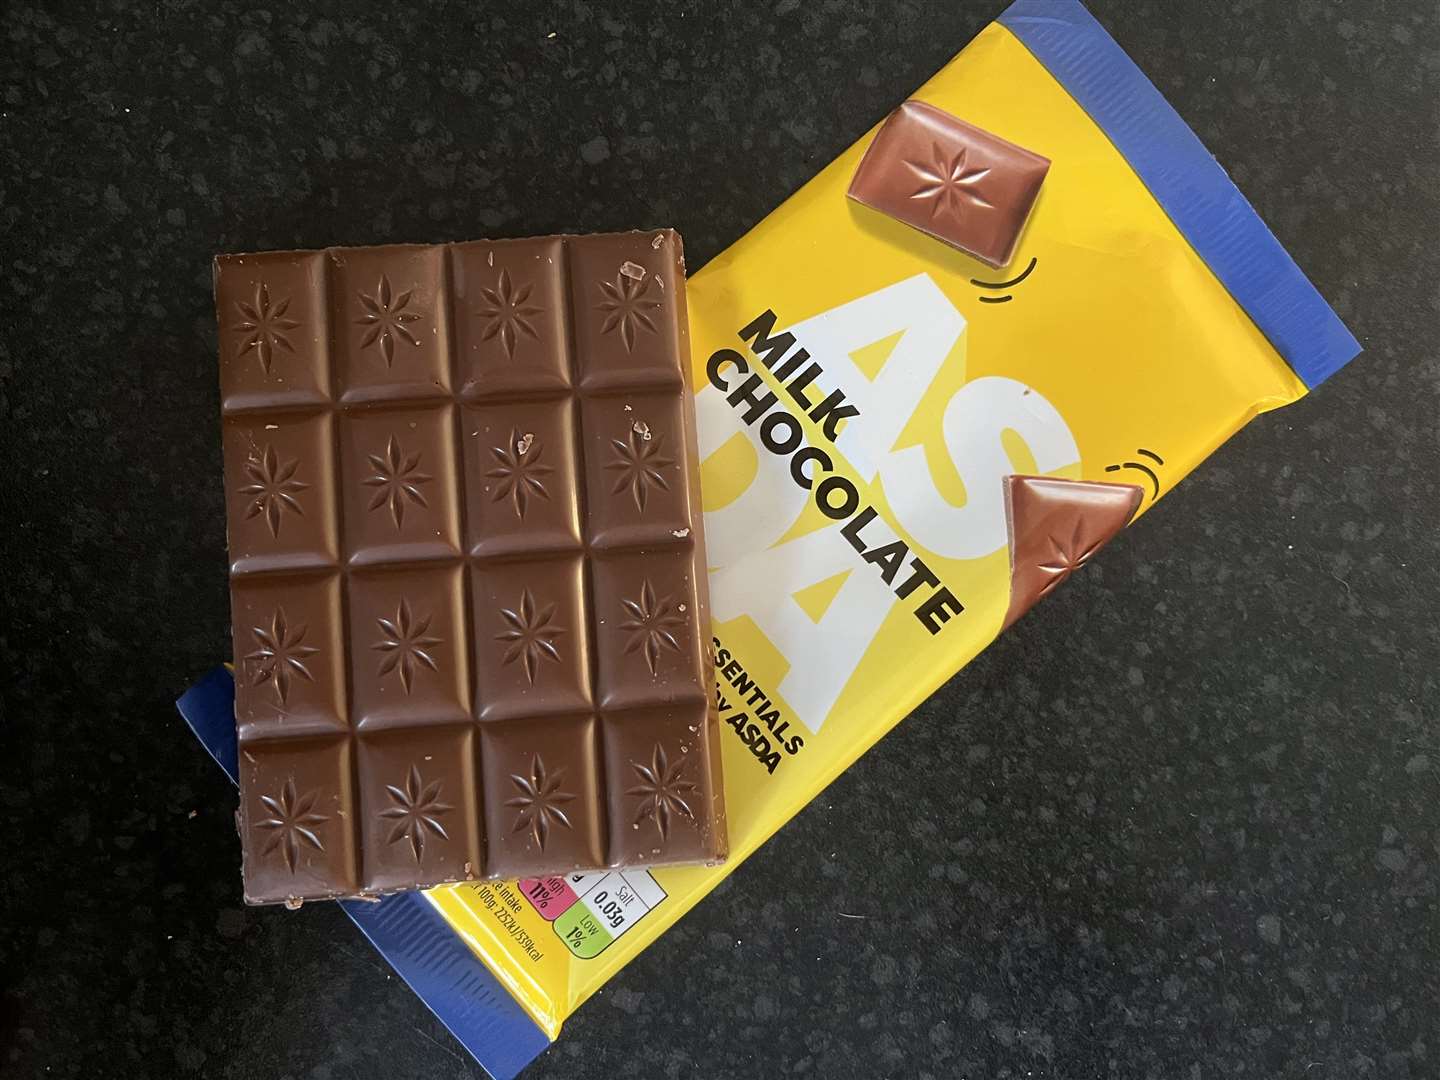 The milk chocolate is worth the swap for just 33p